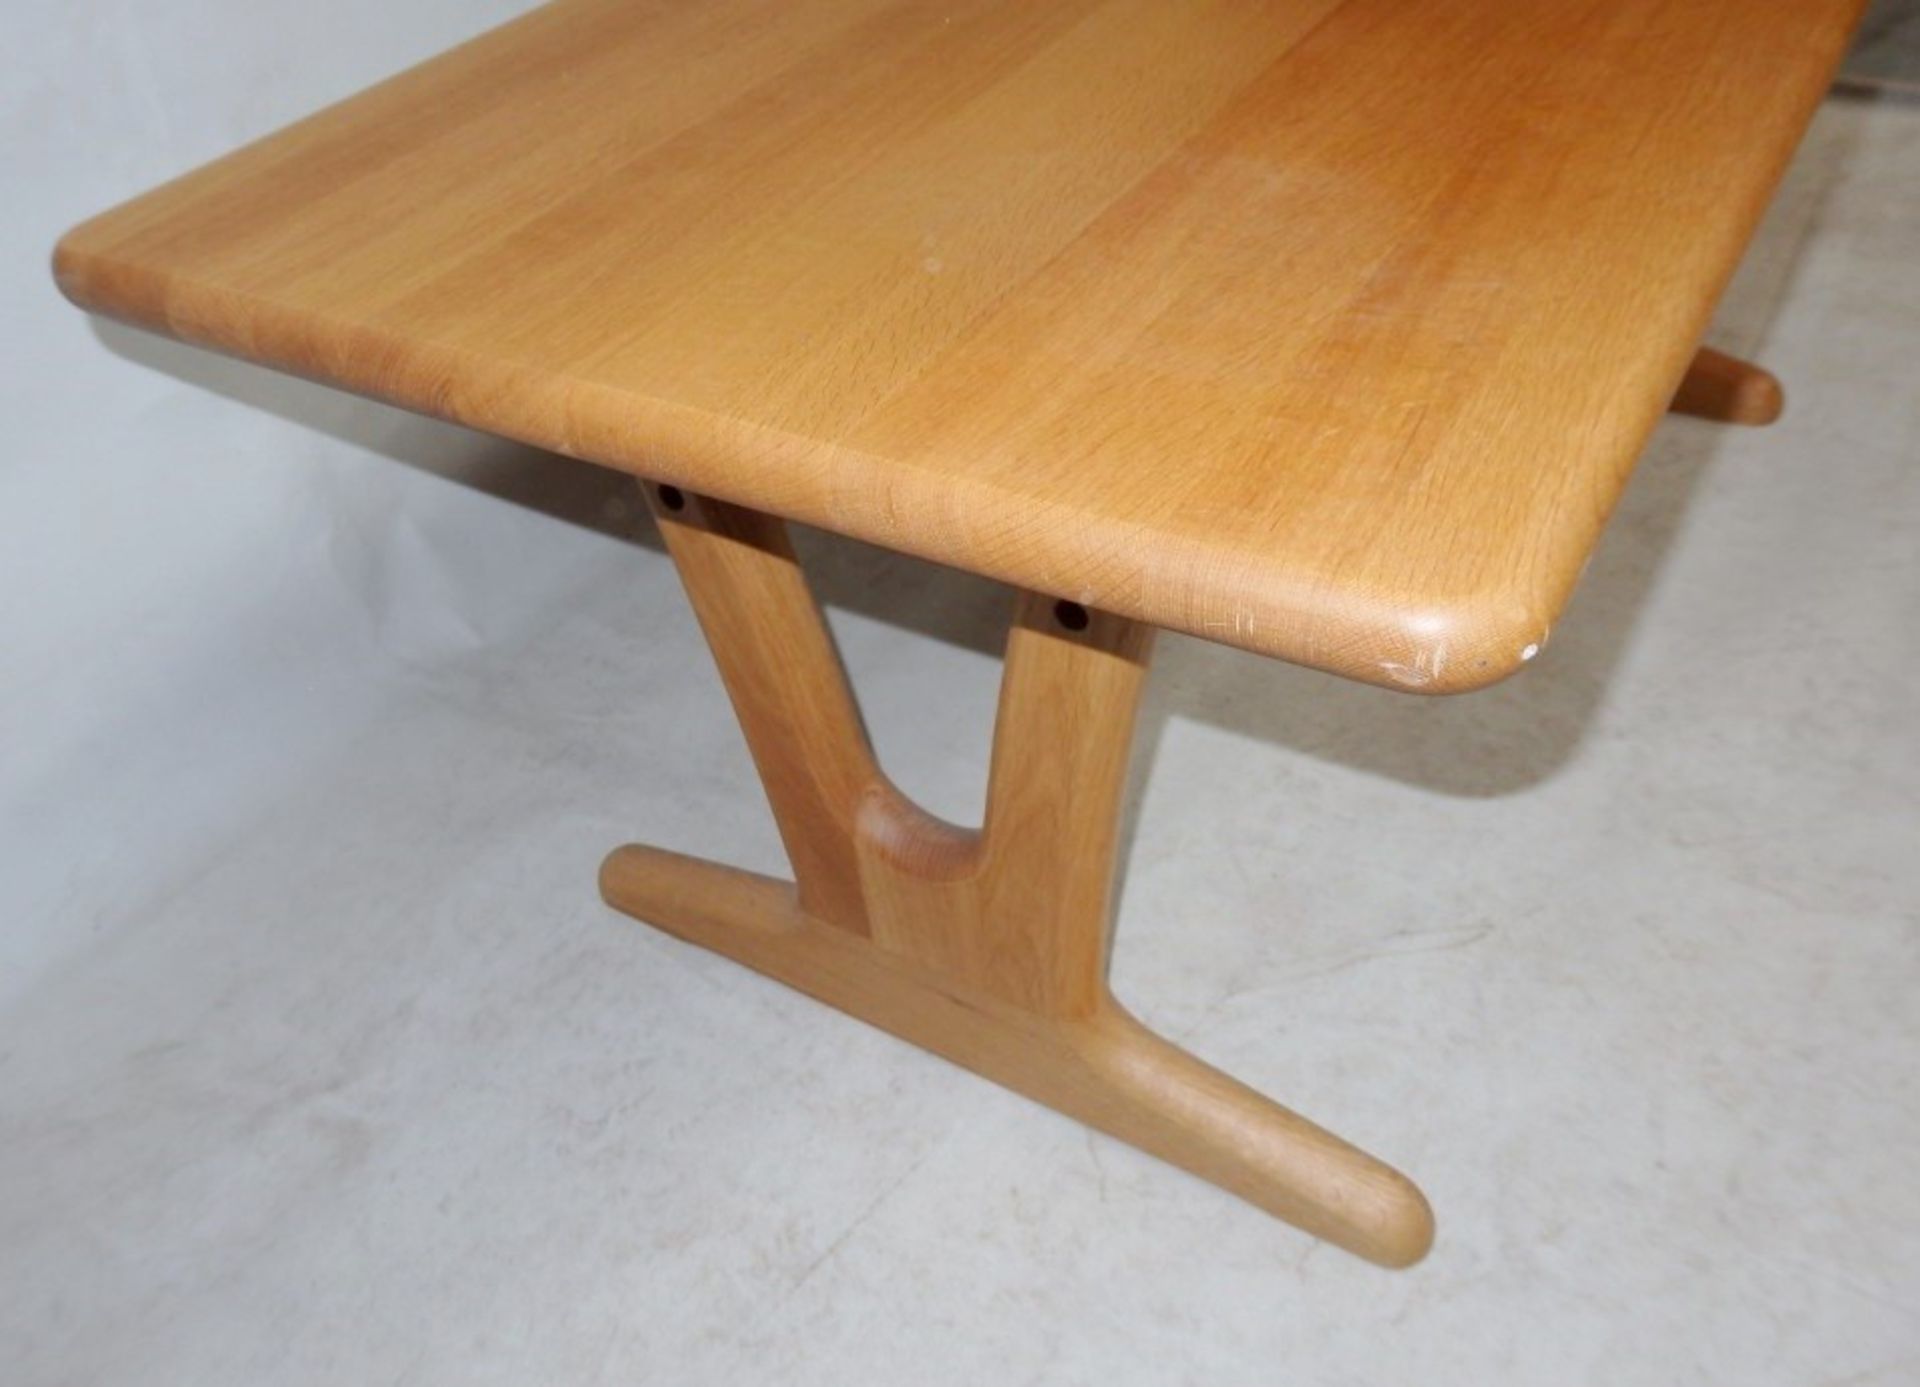 1 x Wooden Table With a Modern Curved Design - Dimensions: W120 x H52 x D60cm - Ref: DB037 - CL122 - - Image 5 of 6